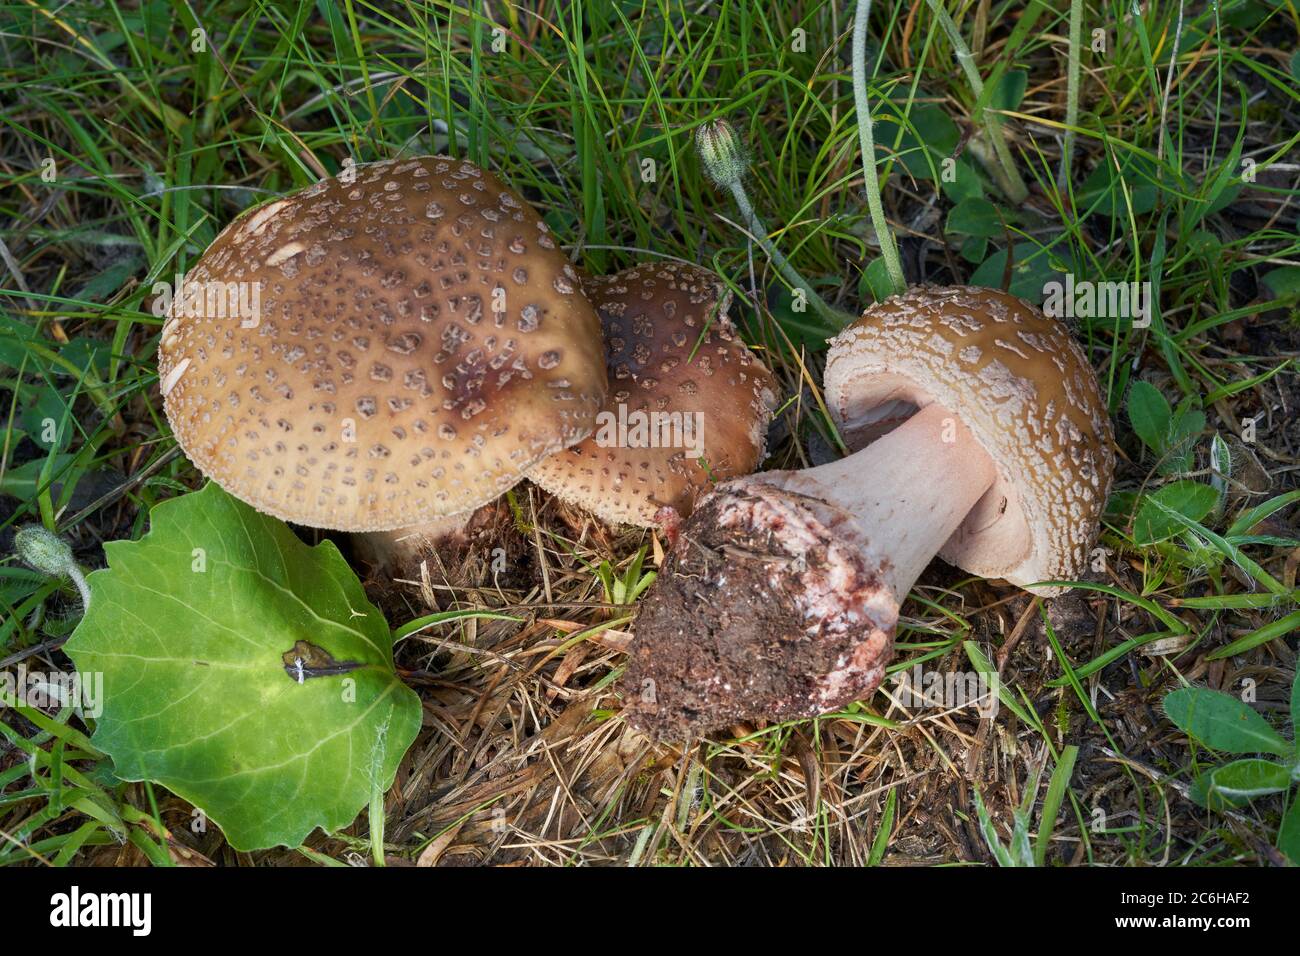 Edible mushroom Amanita rubescens in meadow under birch and aspen trees. Known as blusher mushroom. Wild musrooms growing in the grass, atlas photo. Stock Photo